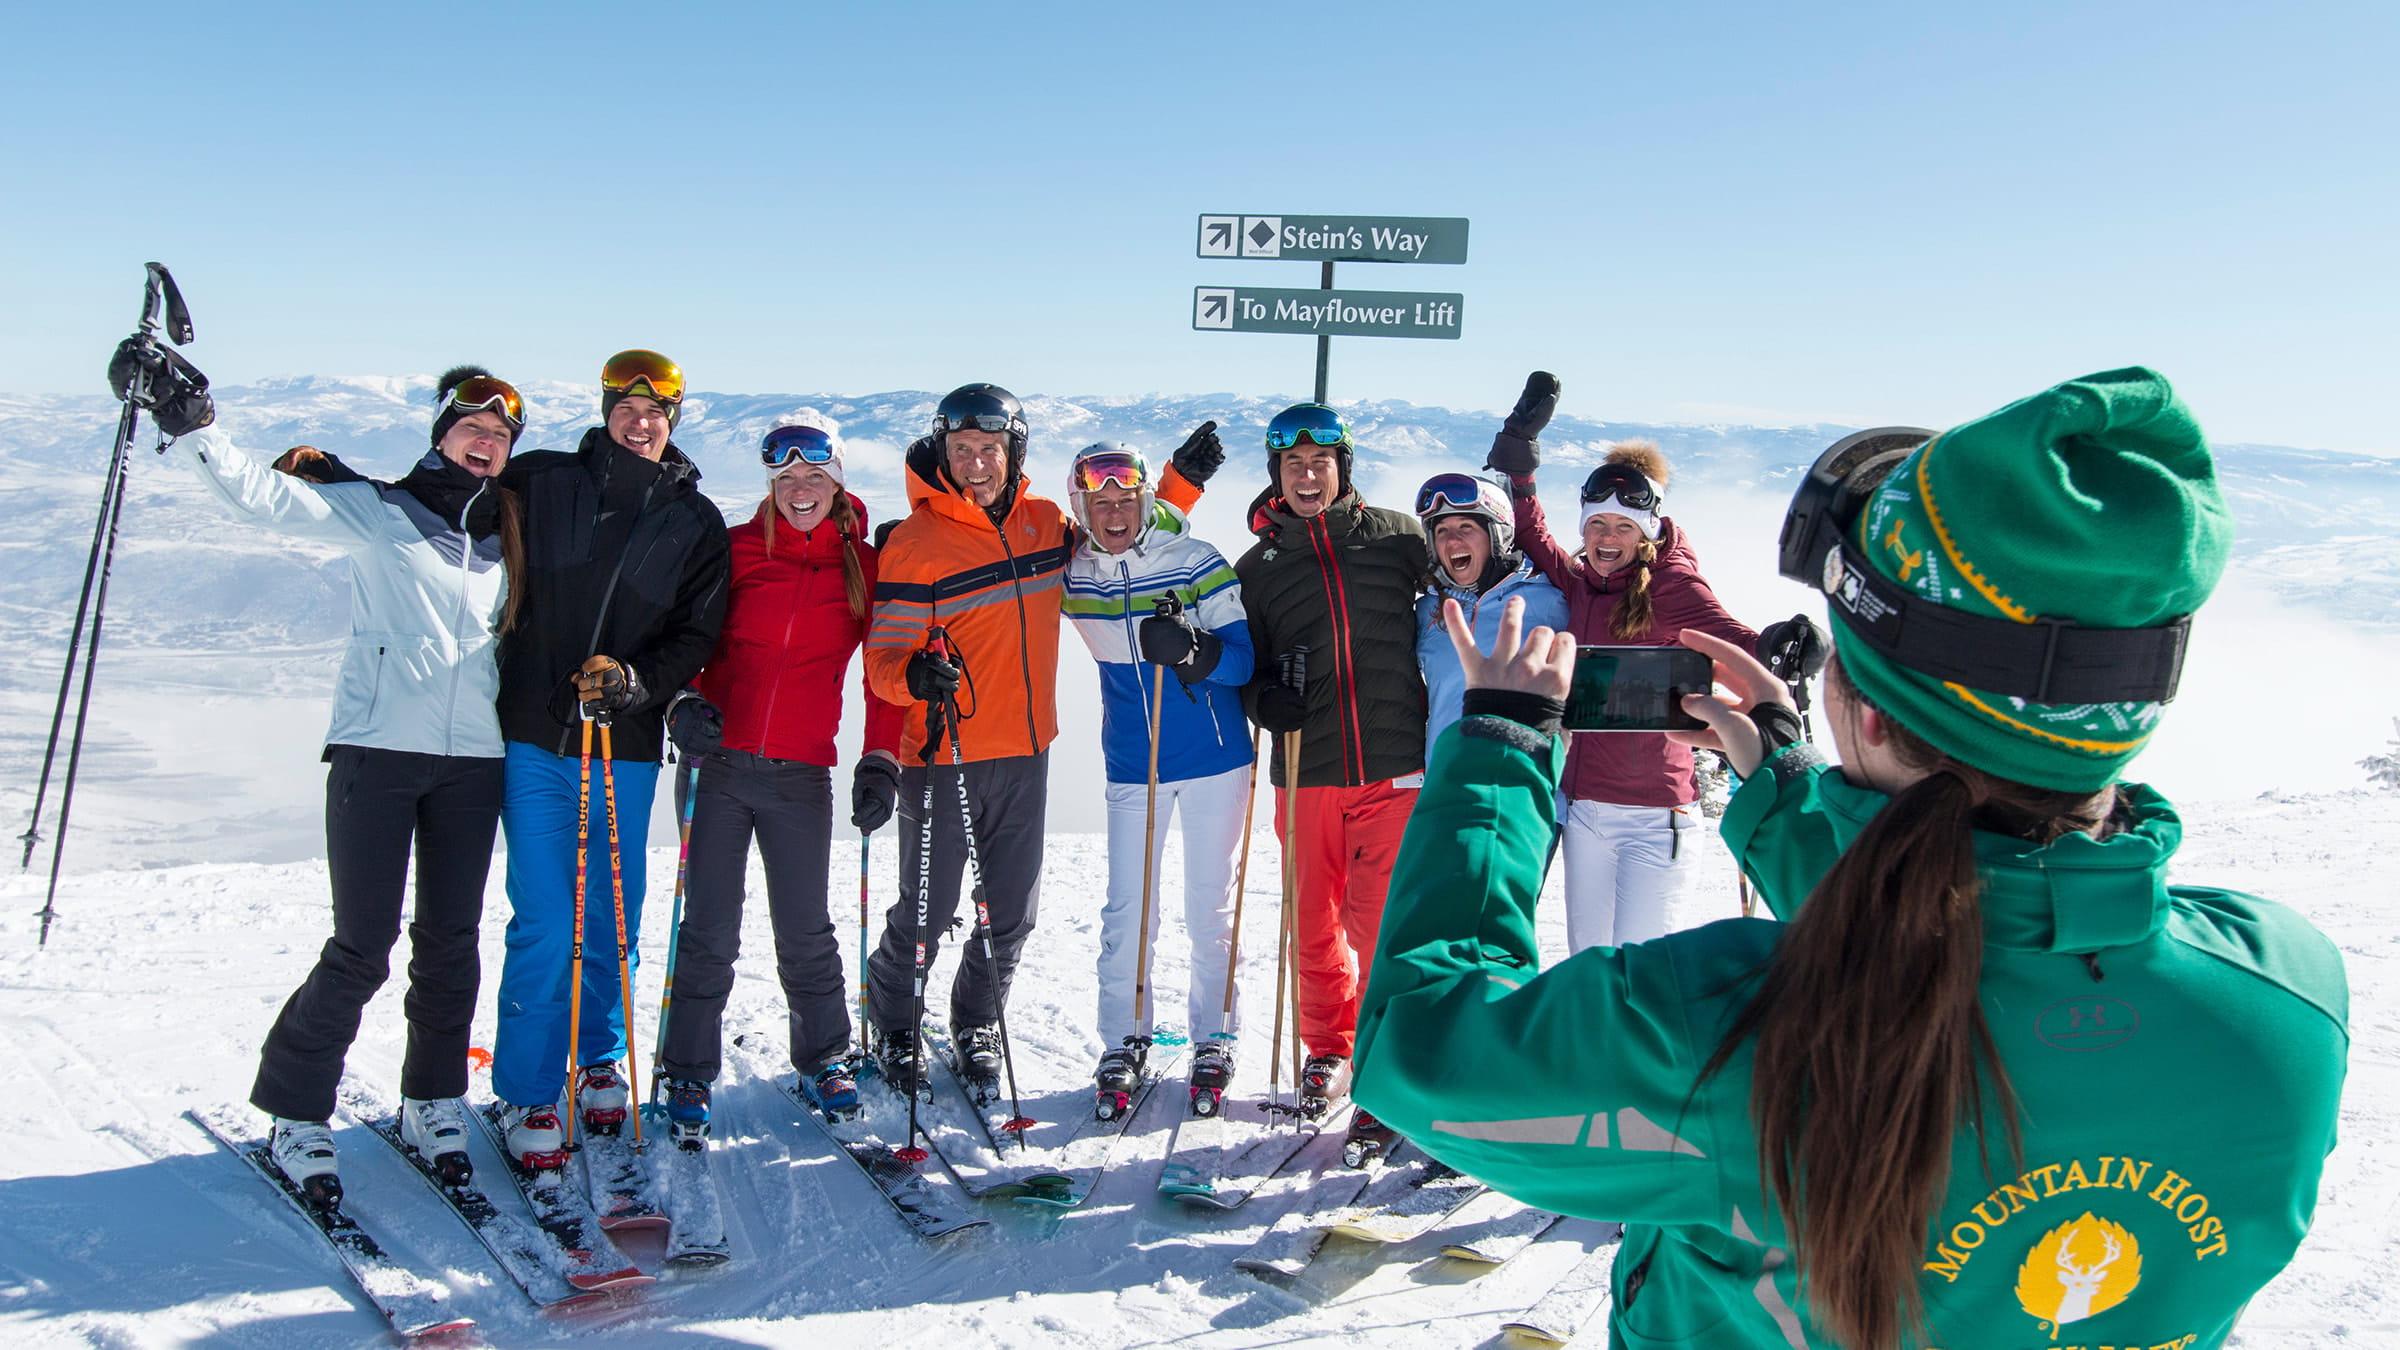 Mountain host giving tour to group of skiers